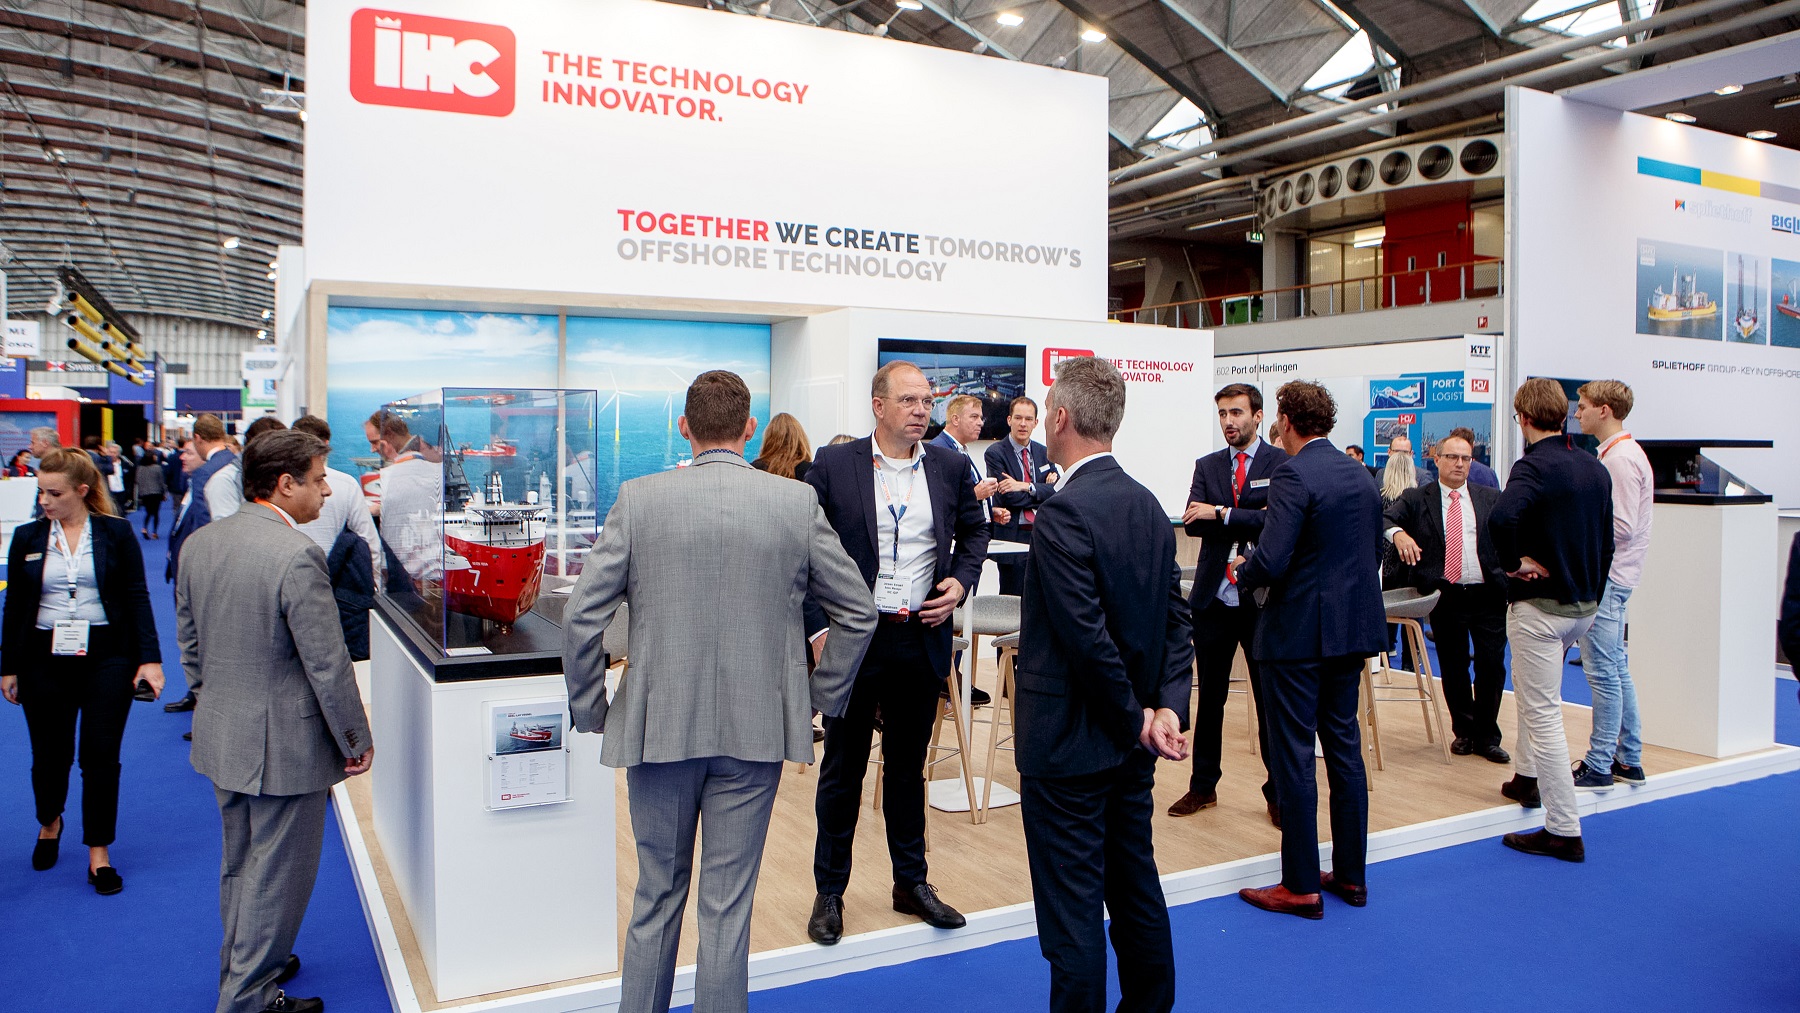 Offshore Energy Exhibition & Conference 2020 Dredging Today